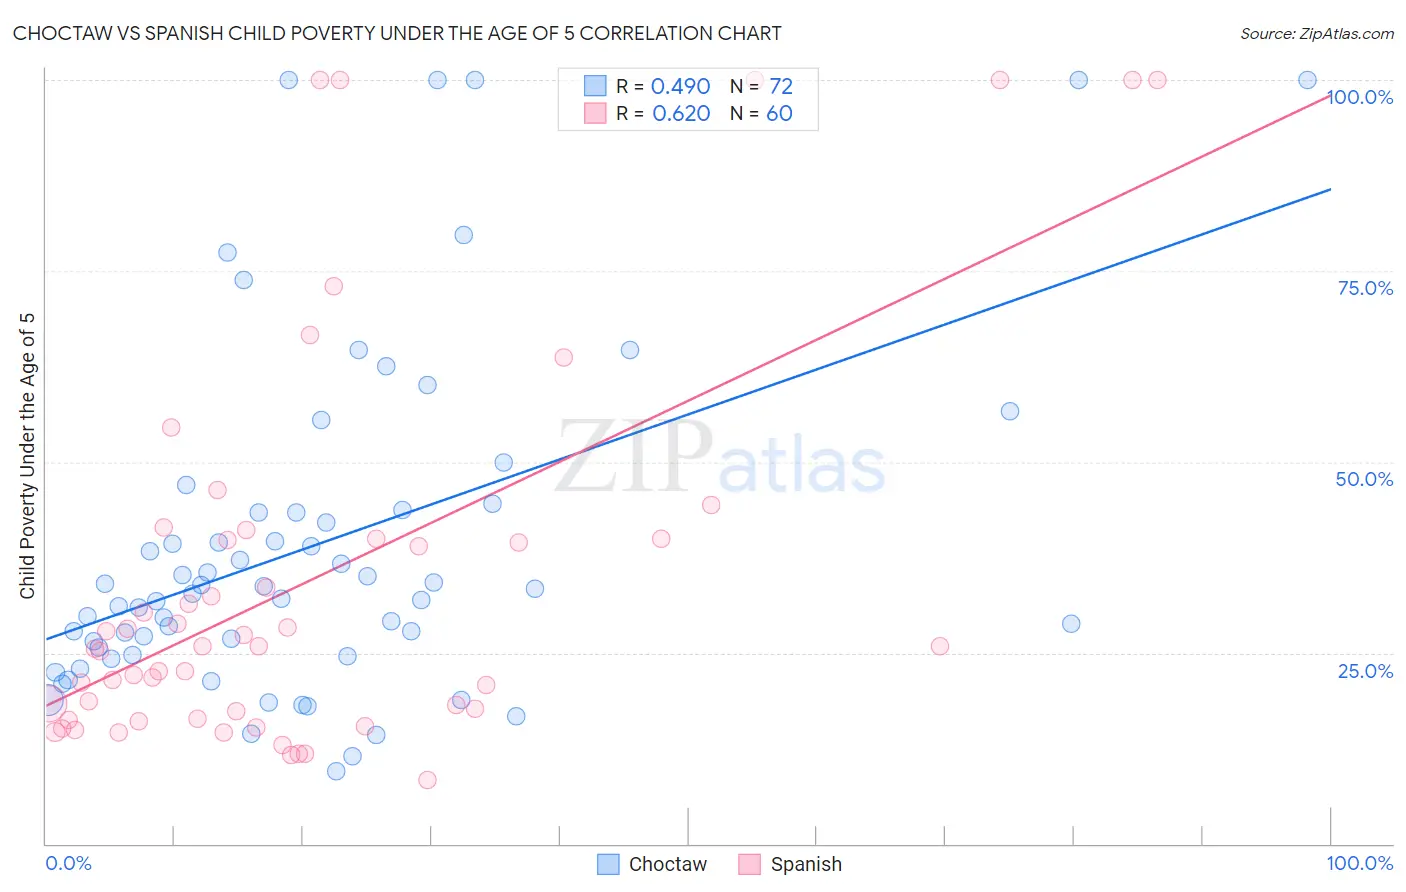 Choctaw vs Spanish Child Poverty Under the Age of 5